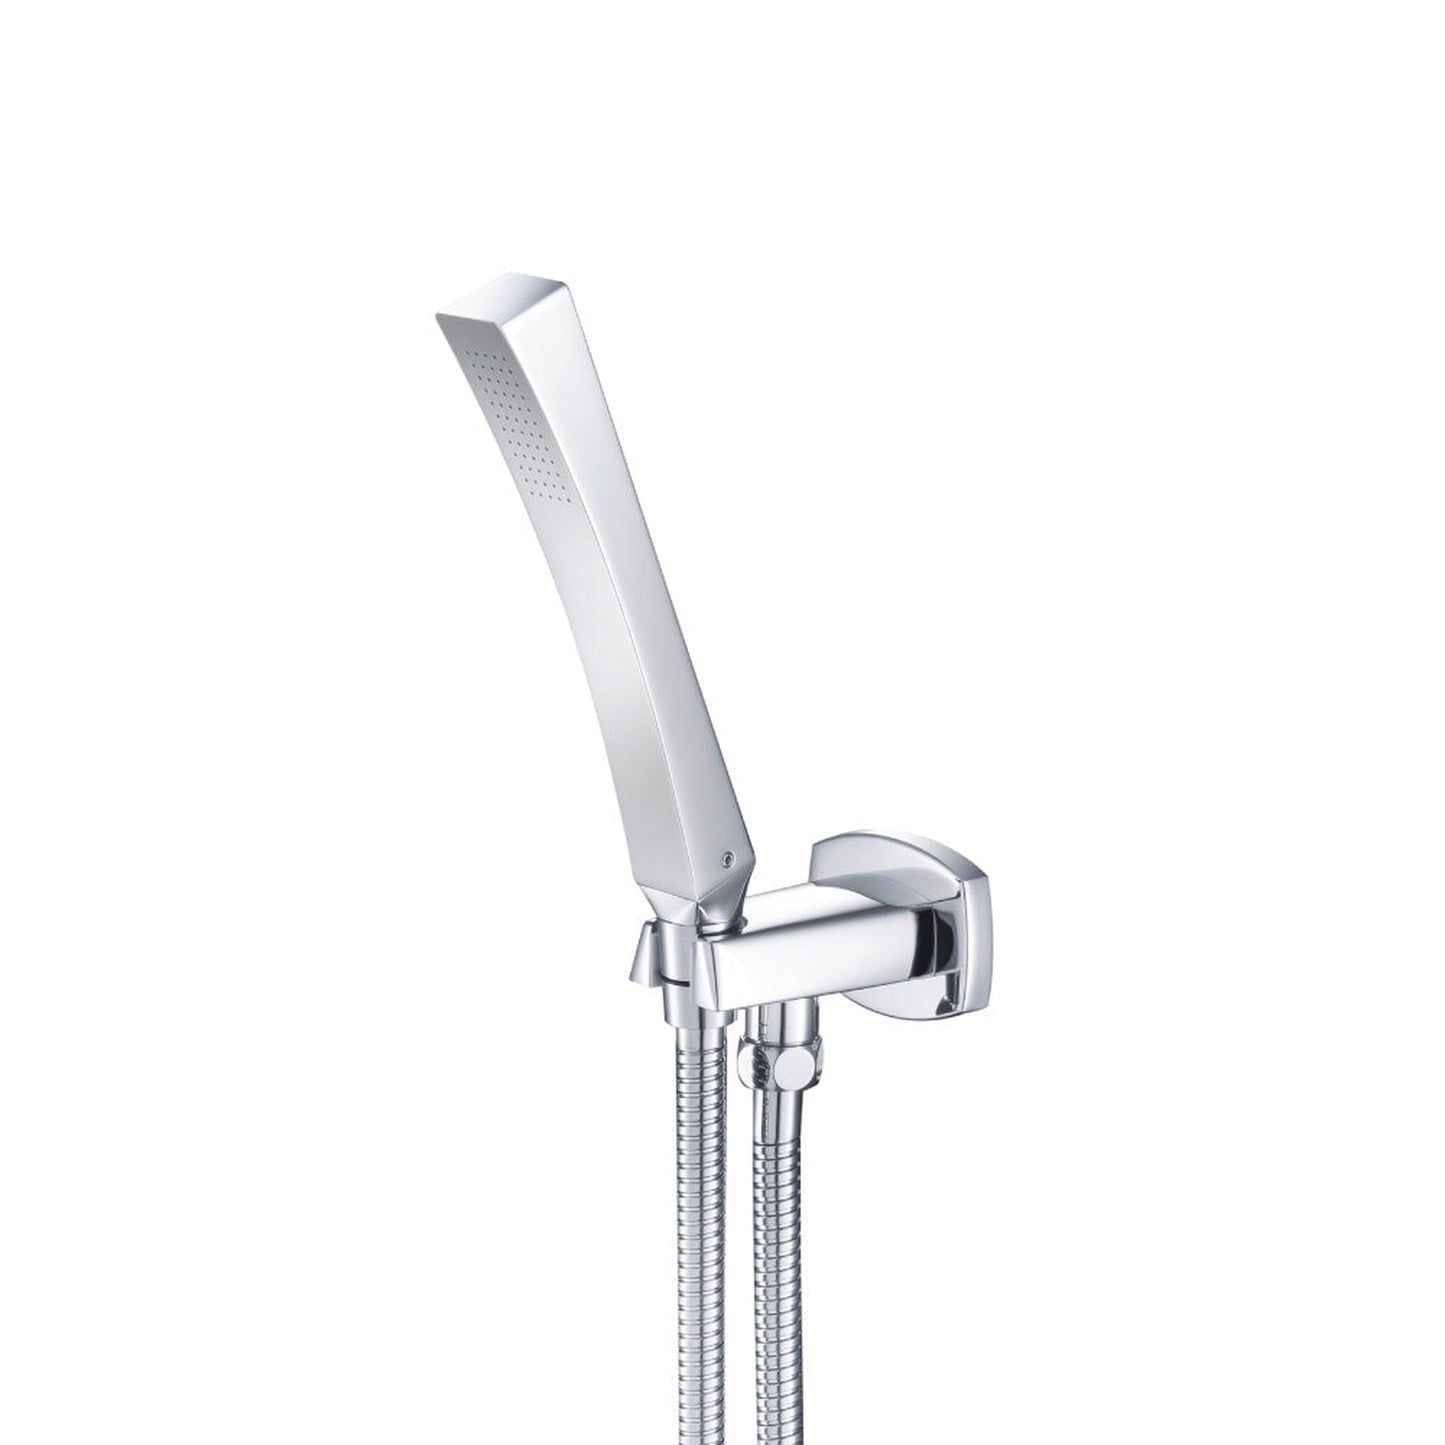 Isenberg Universal Fixtures Hand Shower Set With Wall Elbow, Holder and Hose in Chrome (240.1026CP)